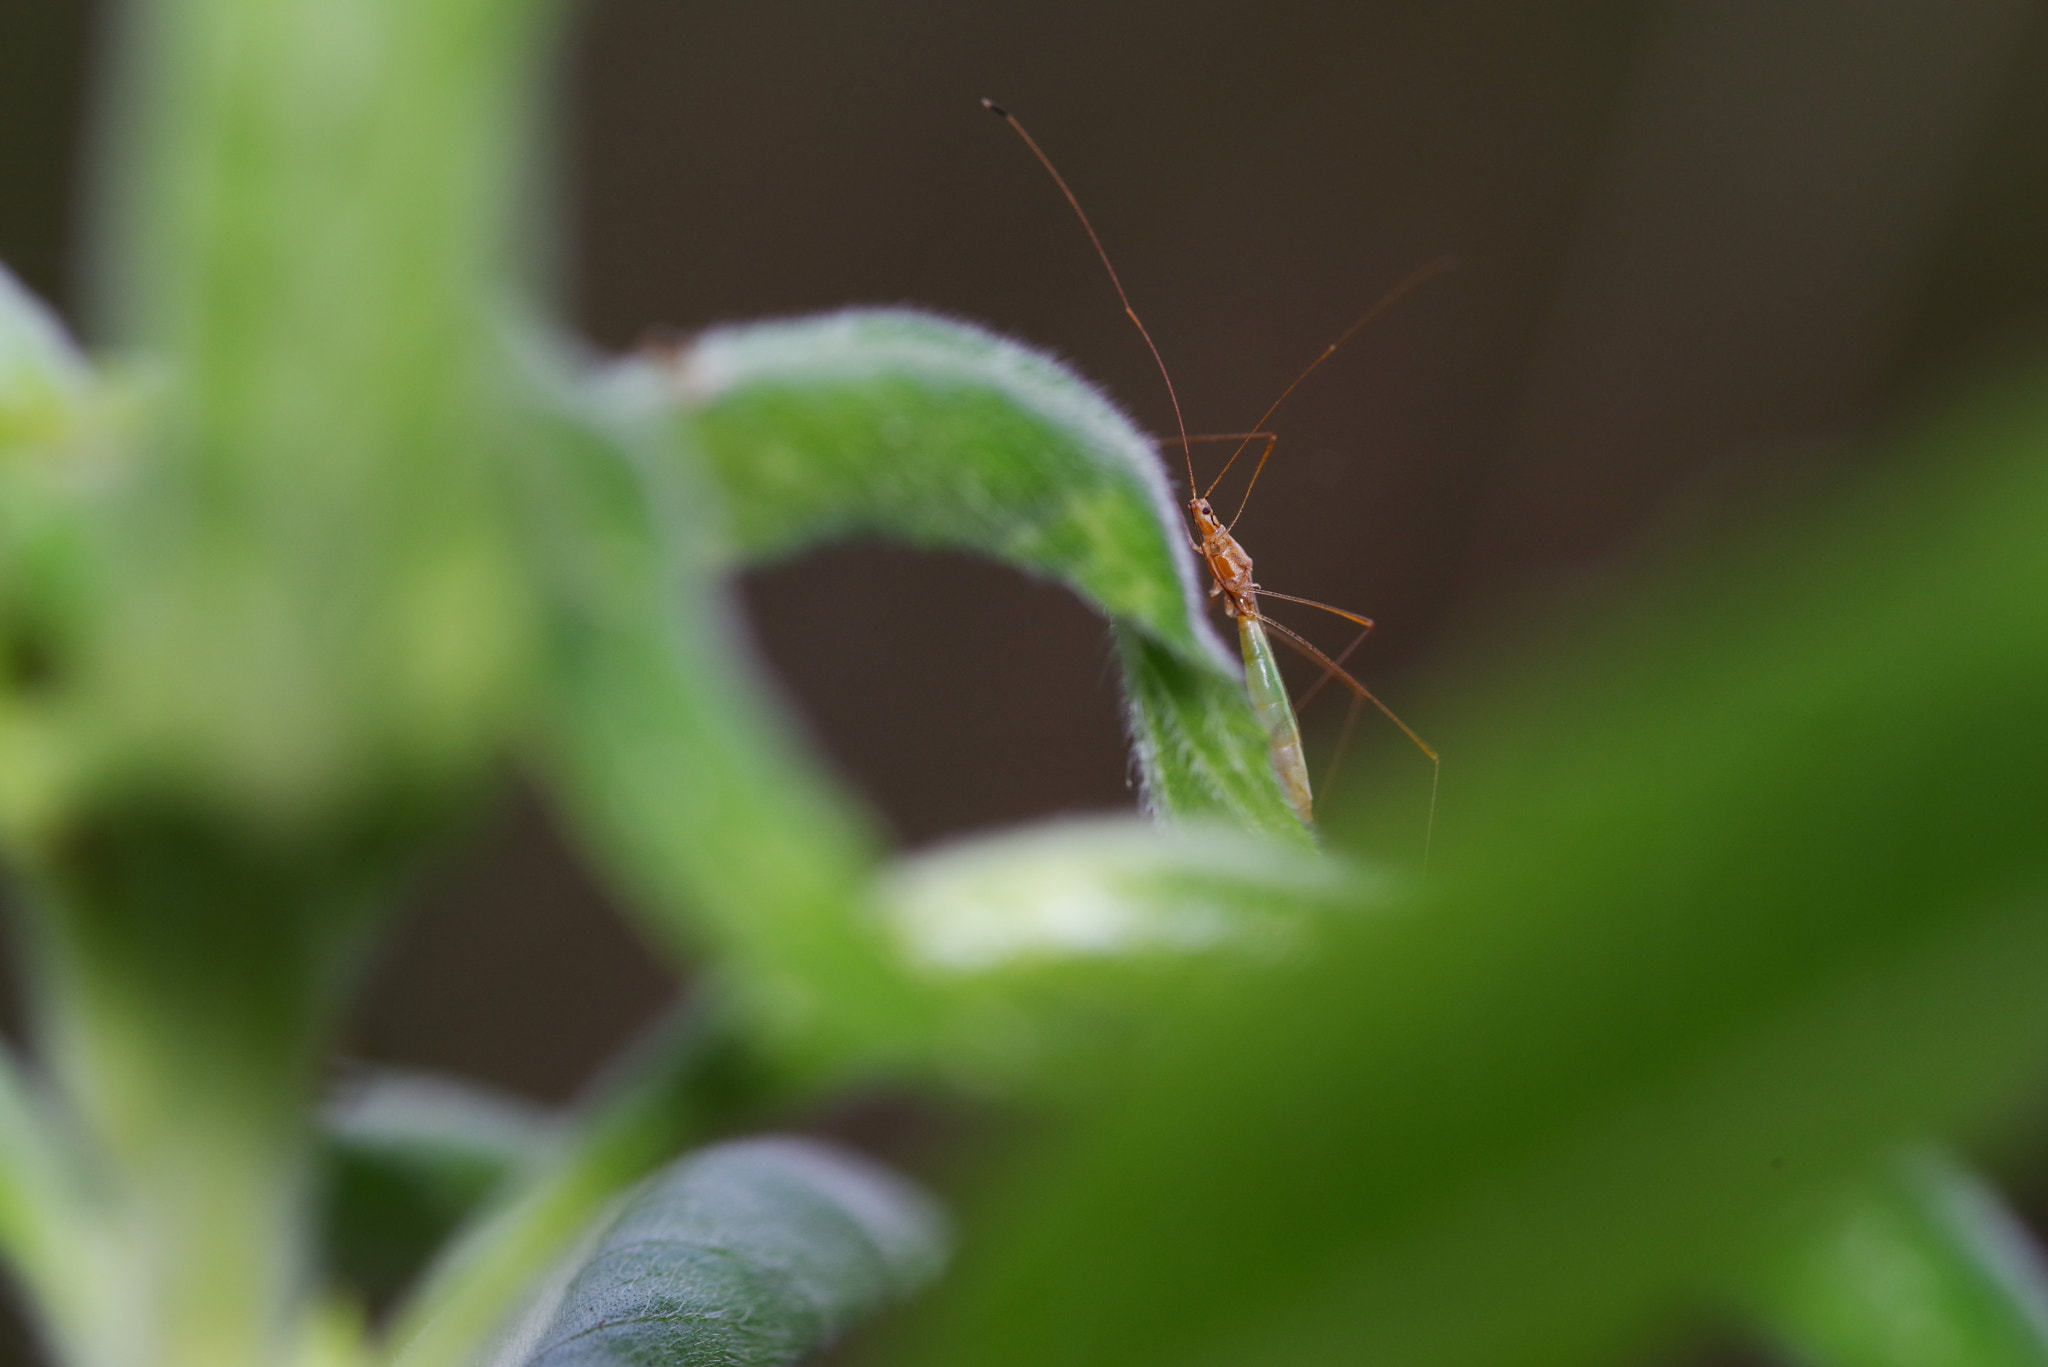 Pentax K-1 sample photo. The world of small insects photography